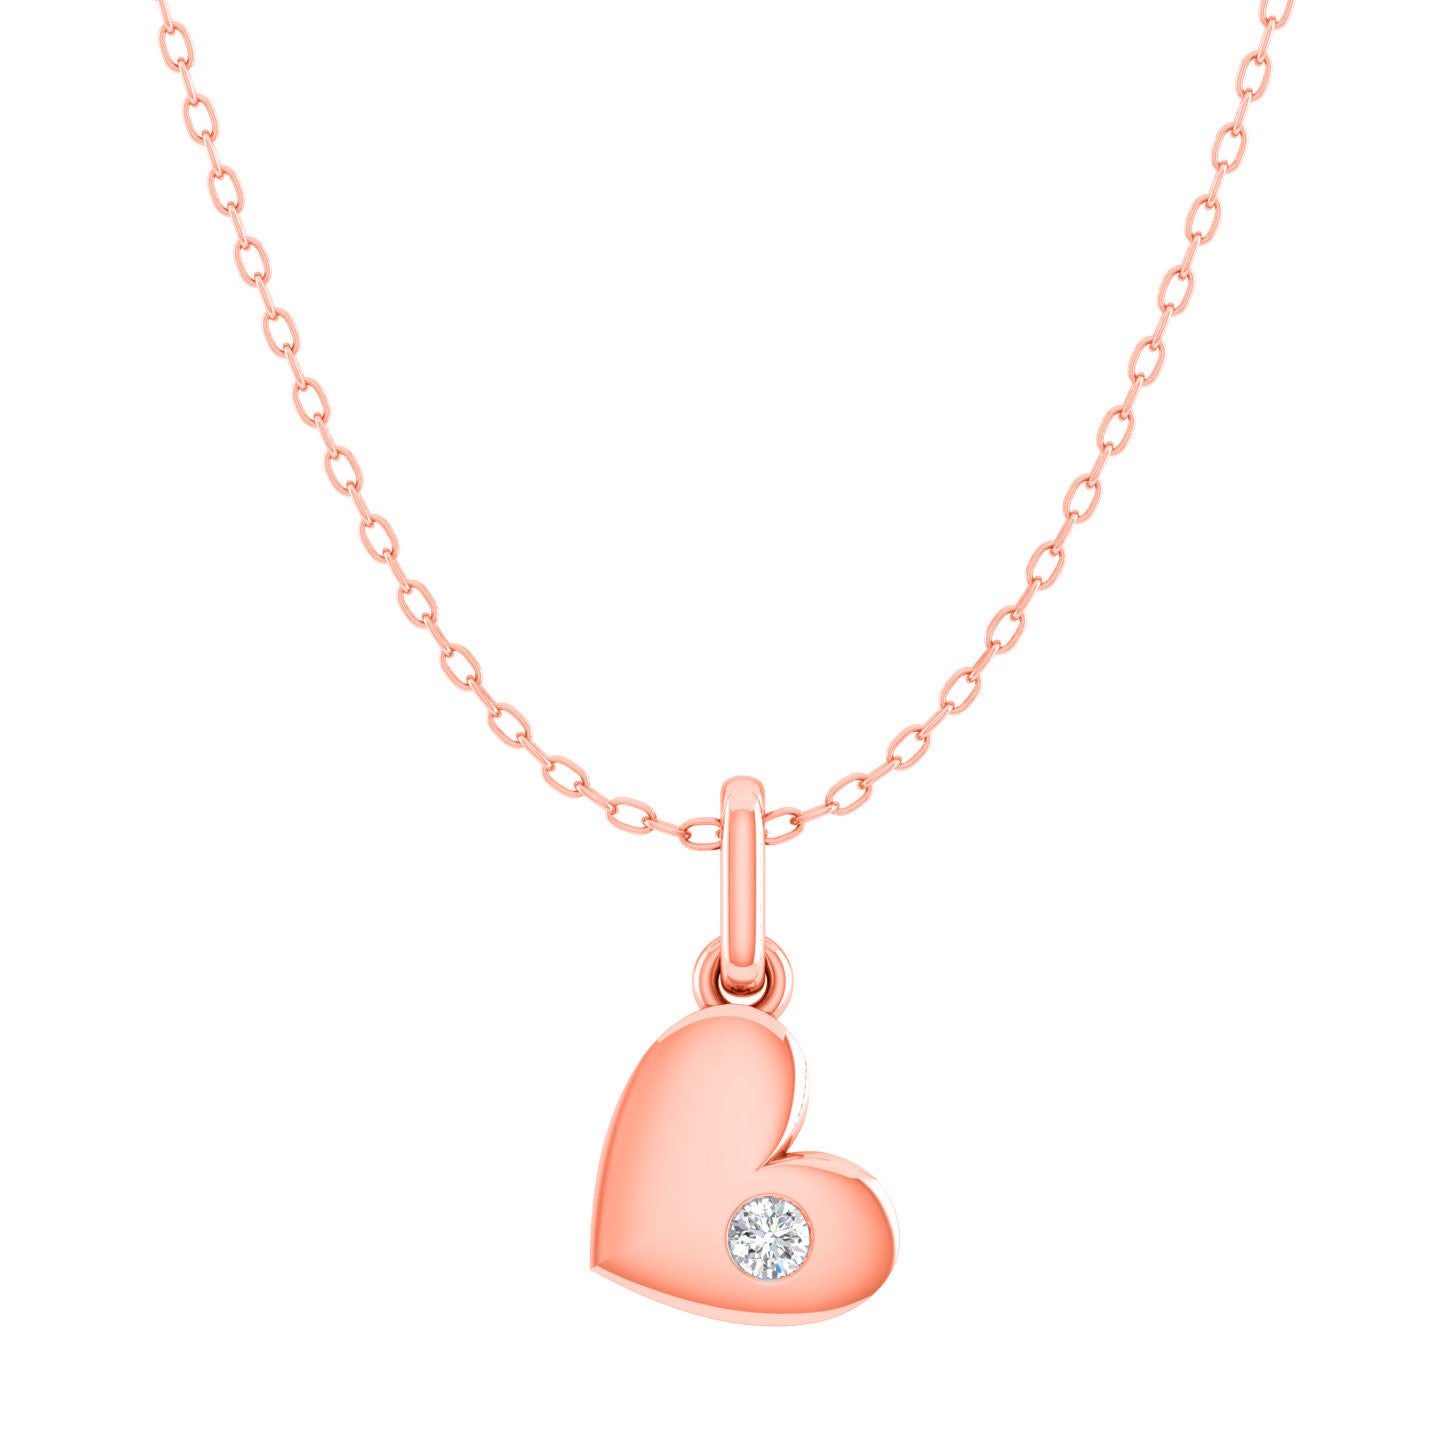 Floating Heart 1/20 Cttw Natural Diamond Pendant Necklace set in 925 Sterling Silver